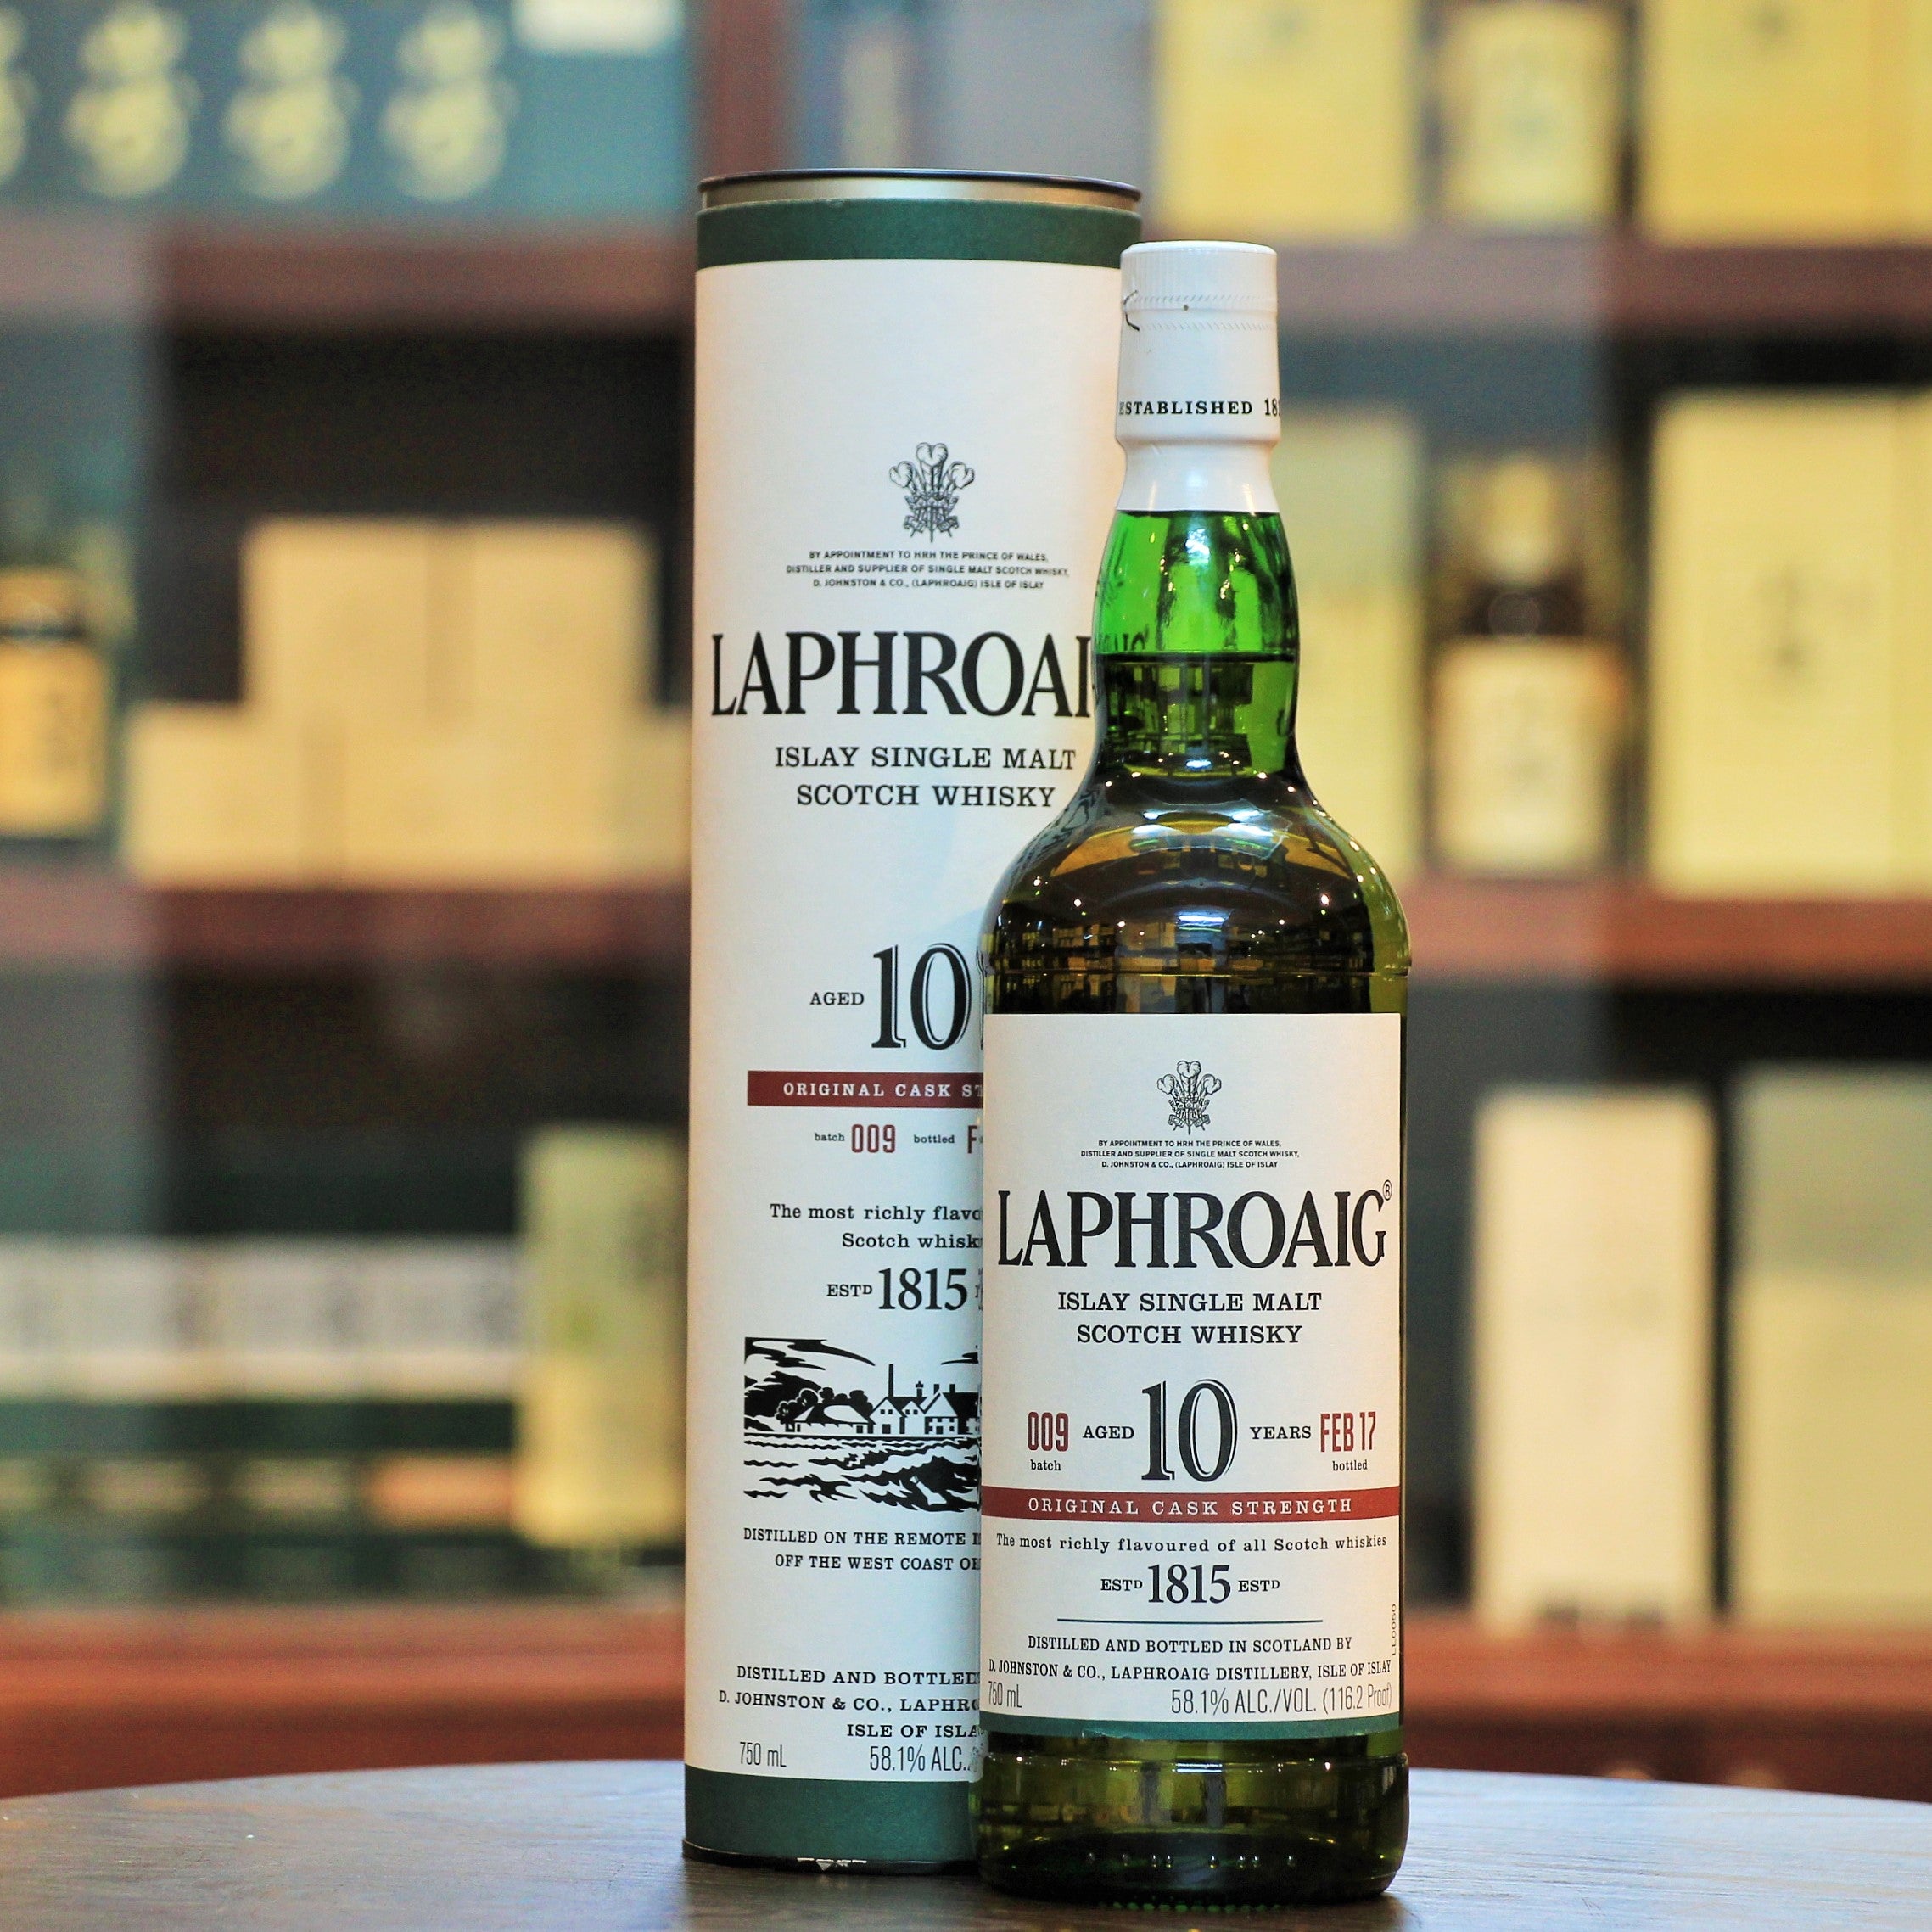 Laphroaig 10 Cask Strength Batch 9, The incredibly popular cask strength versions released in limited quantities. This is the Batch 9 Release.